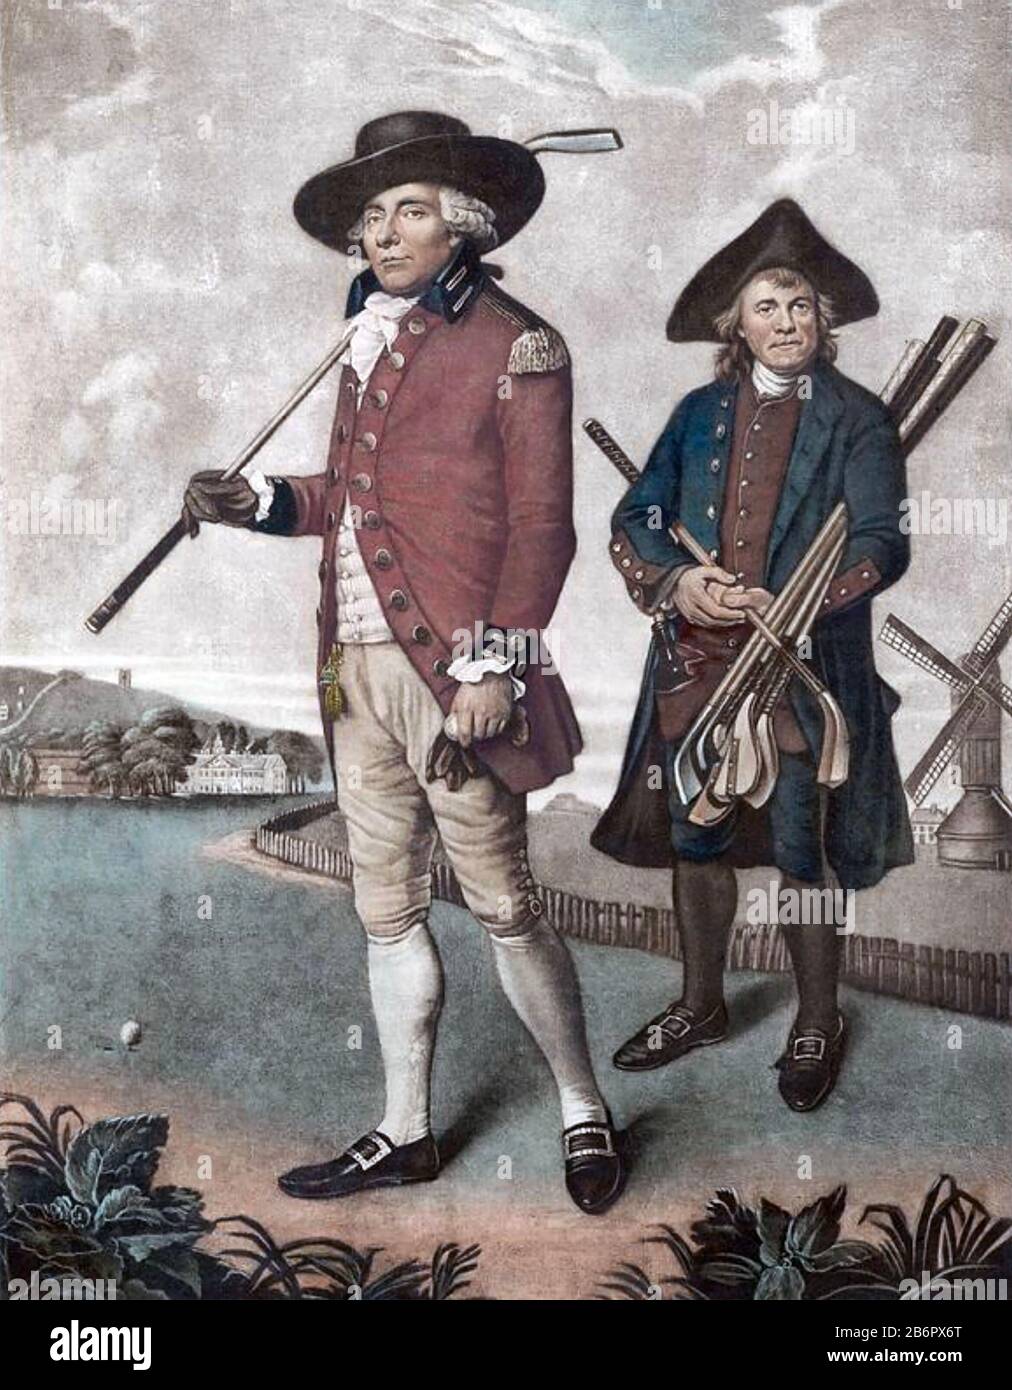 WILLIAM  INNES,captain of the Society of Golfers at Backheath in 1778. One of several versions of the same iamge. Stock Photo